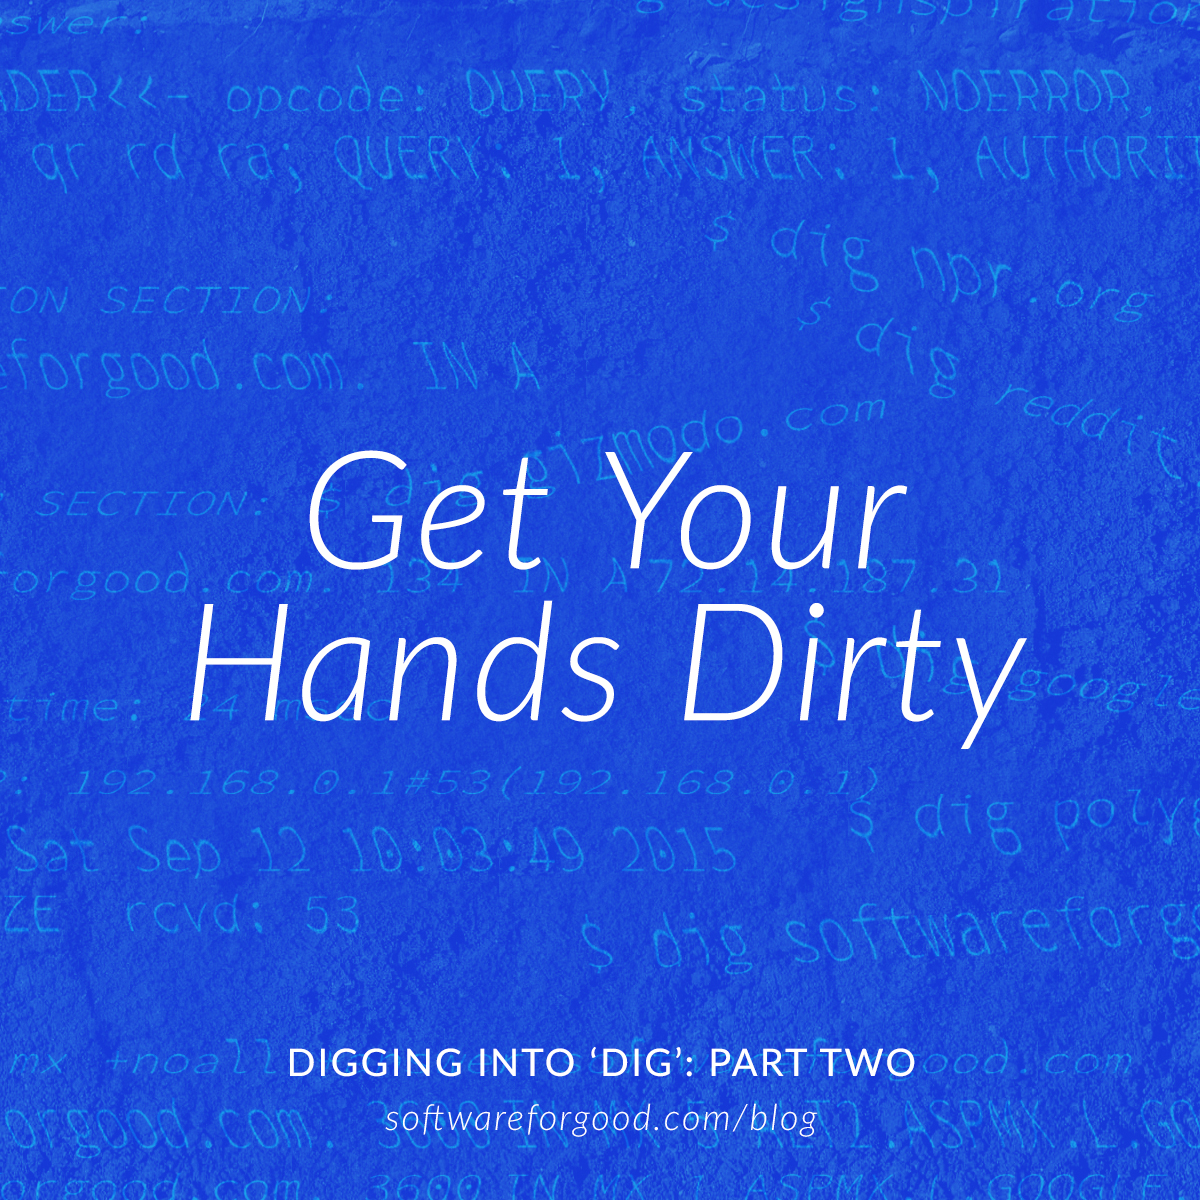 Digging Into`dig`: Get Your Hands Dirty